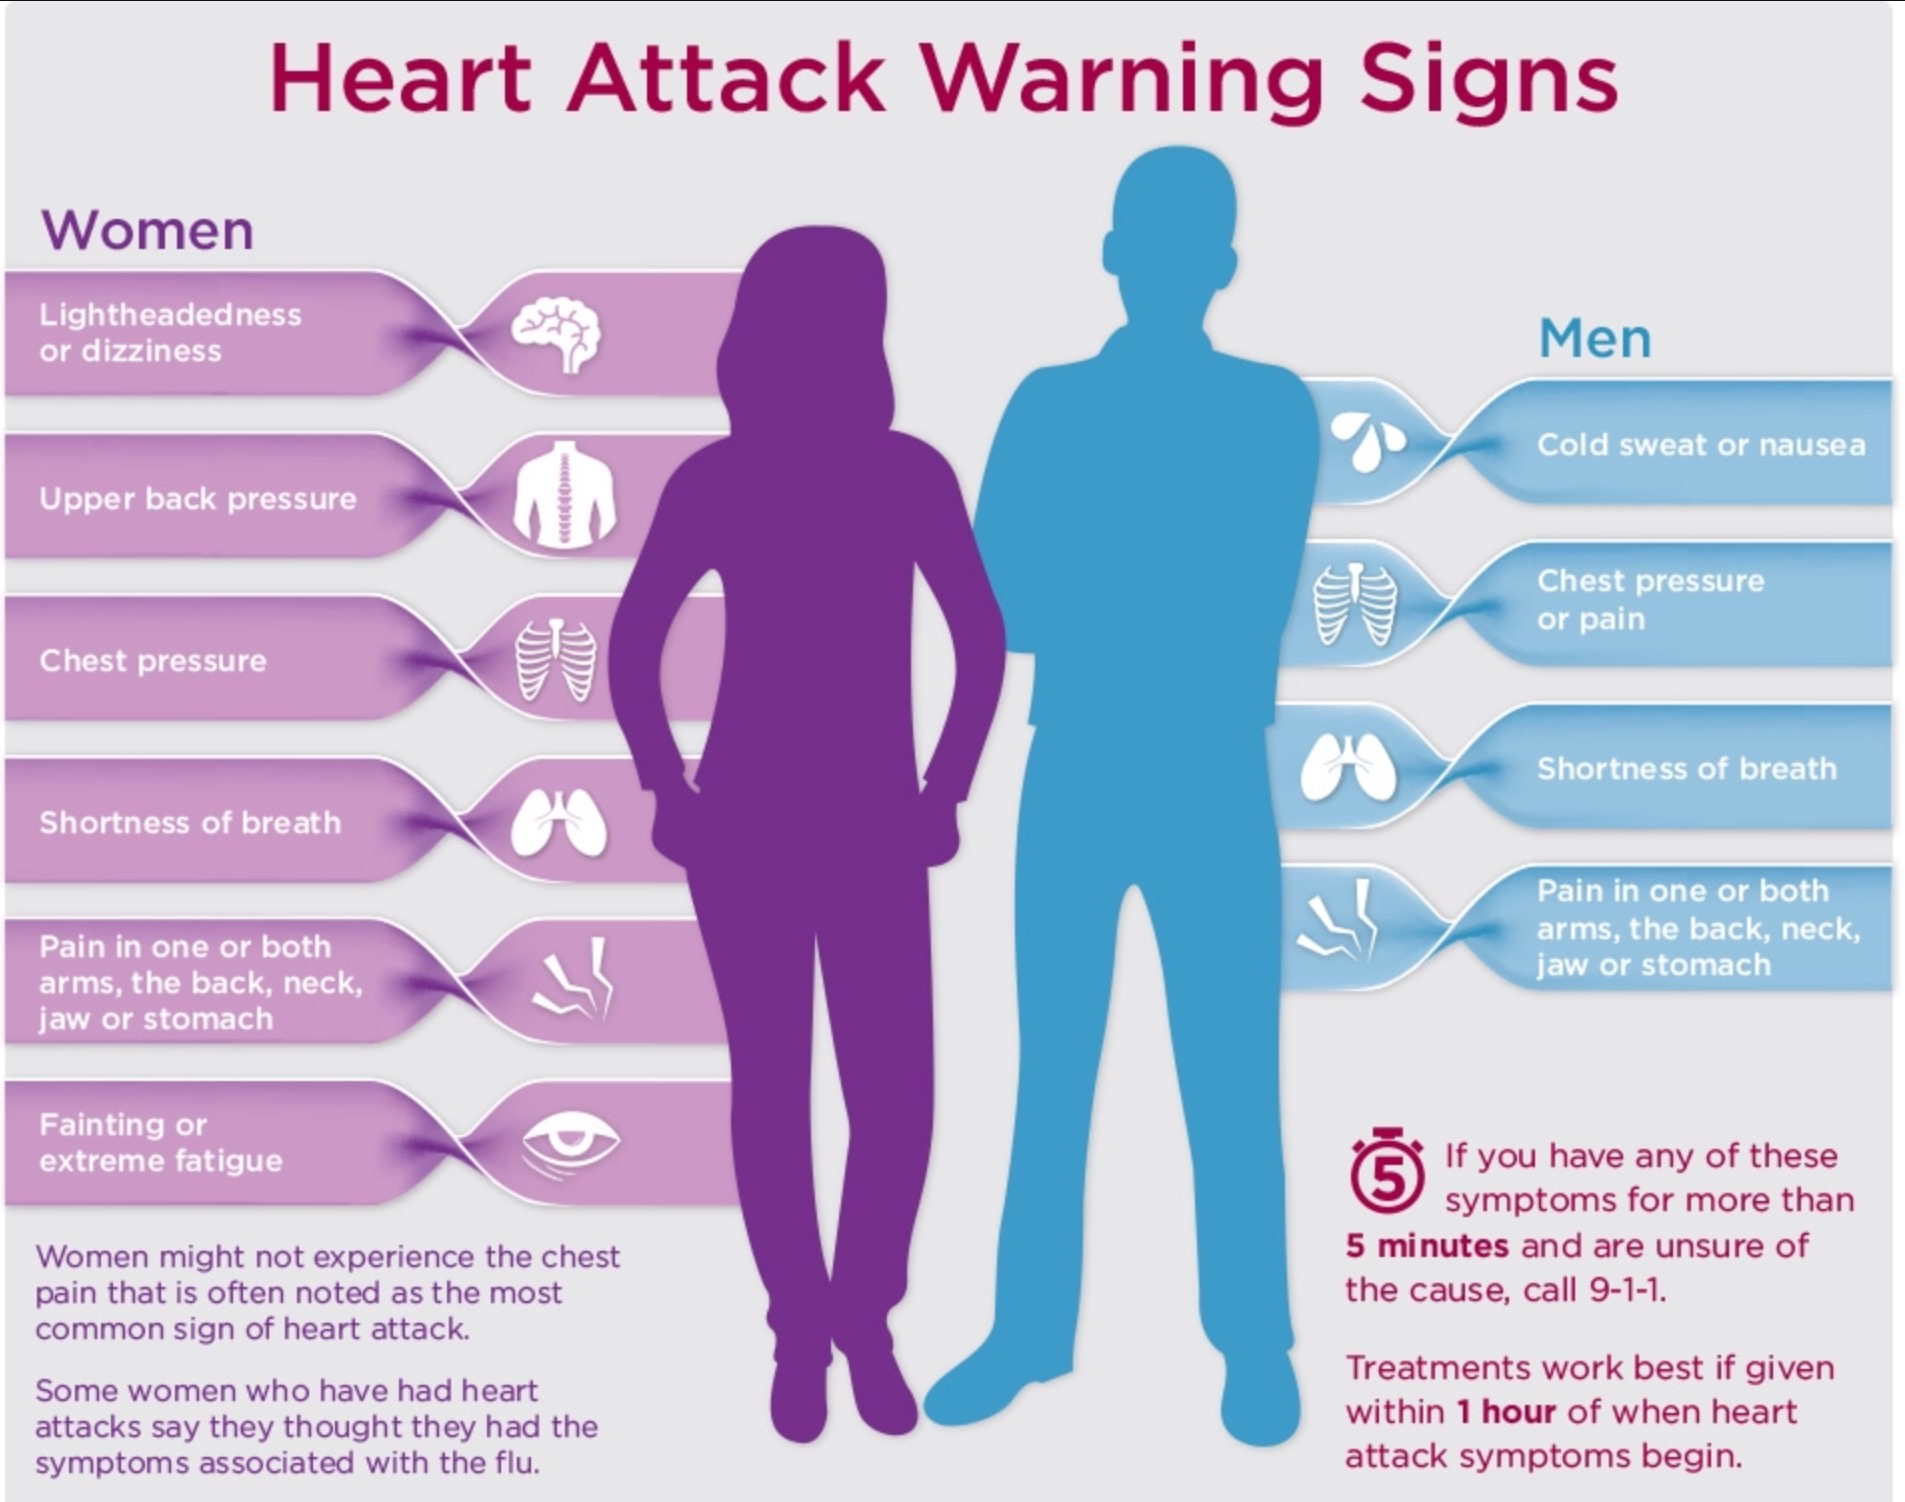 Signs/Symptoms of Heart Attack